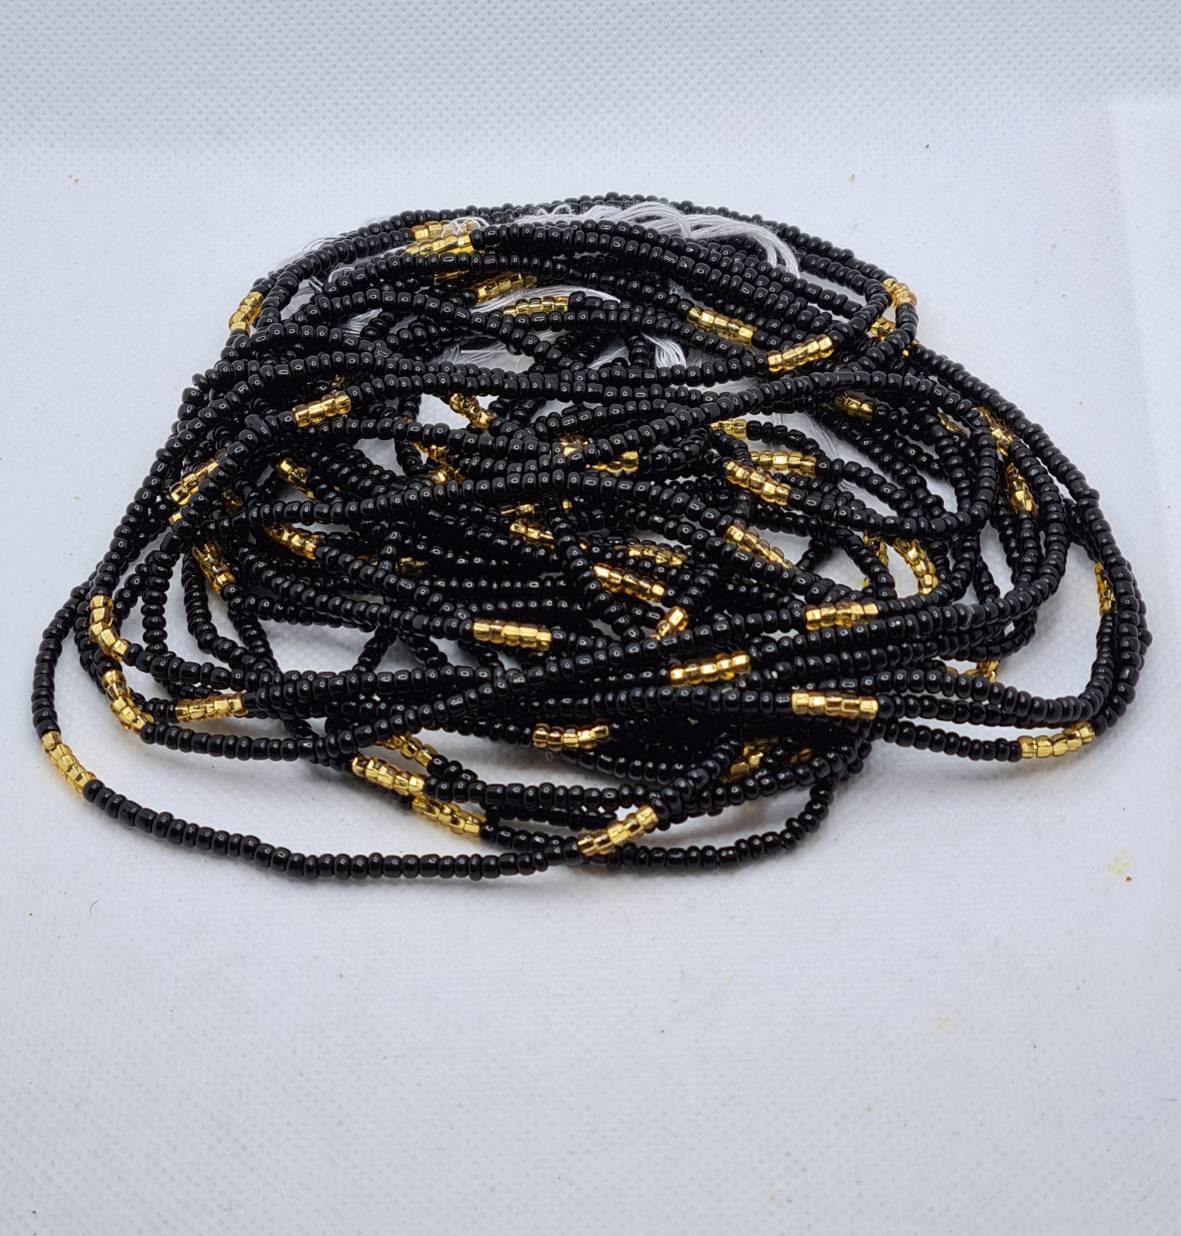 Black and Gold Waist Beads|On Sale Belly Chain Weight control African beads|belly beads| Ghana beads| Weight Tracker Beads| Nigerian Beads